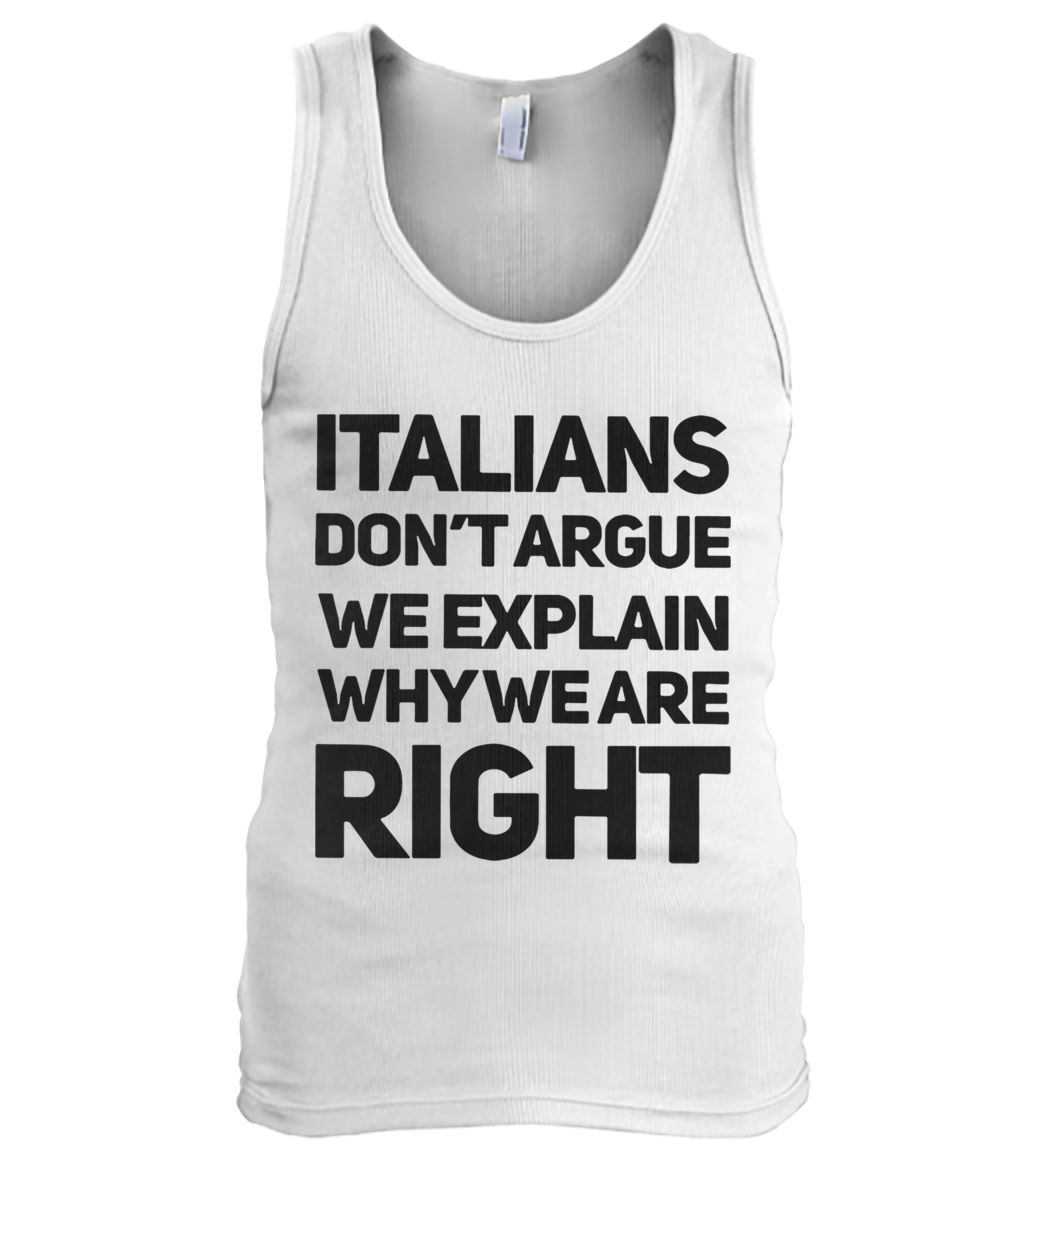 Italians don’t argue we explain why we are right tank top